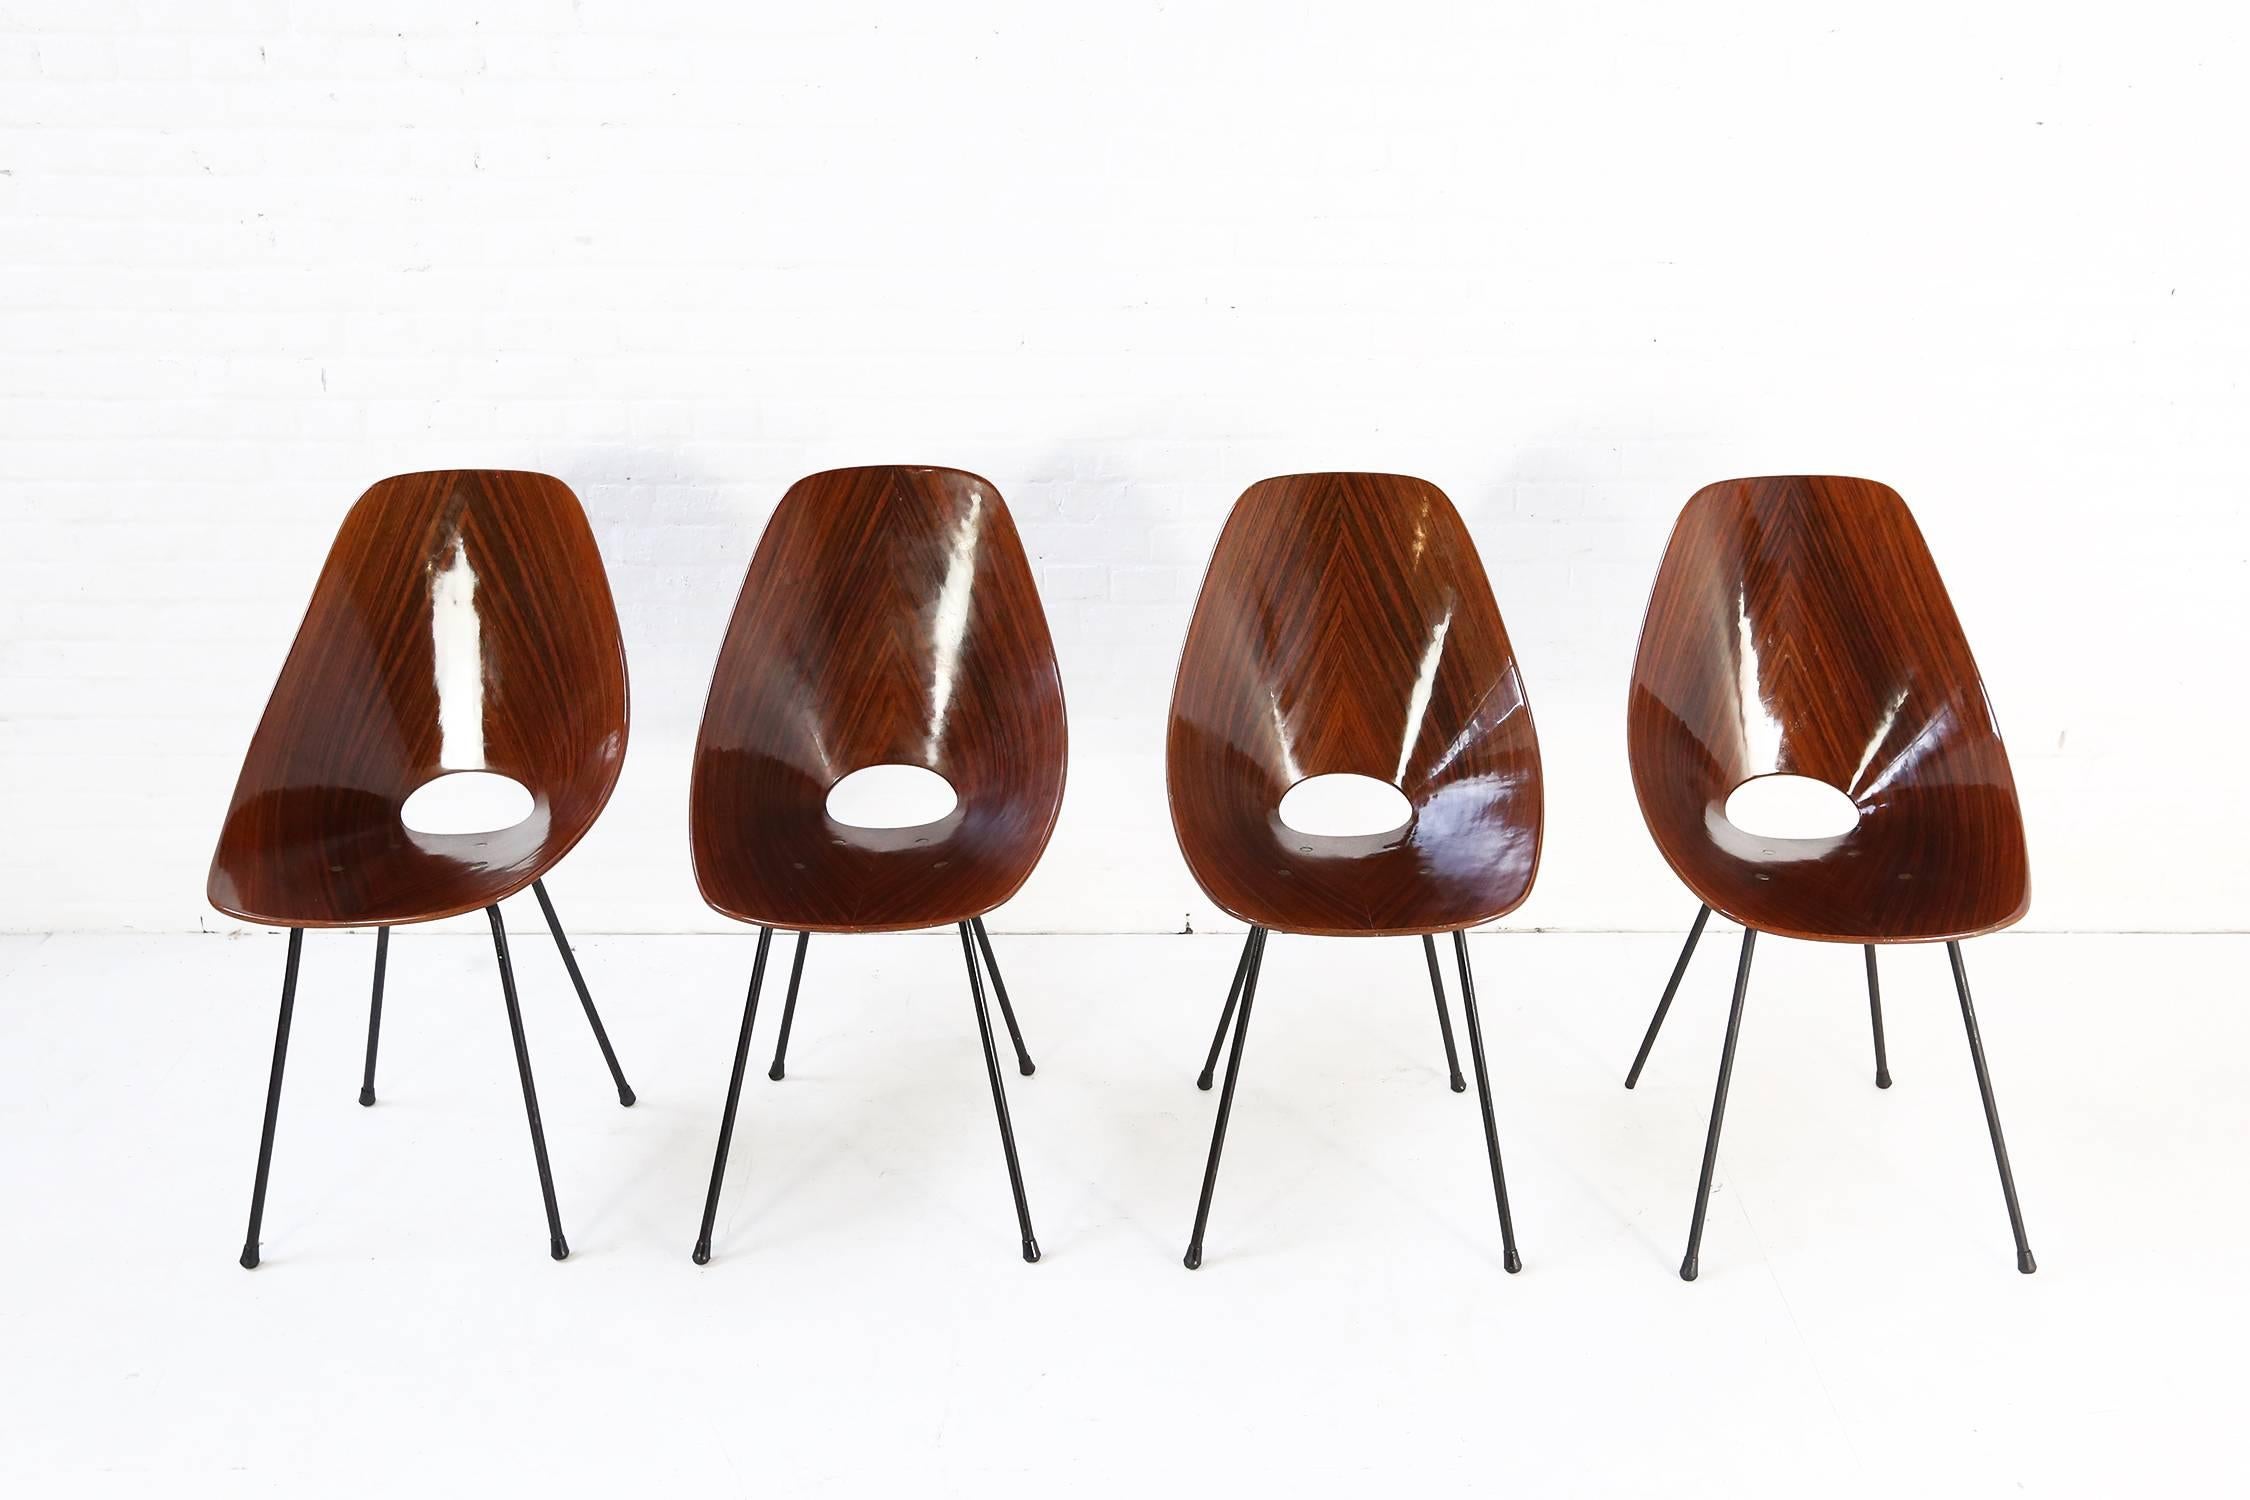 A rare set of six Medea chairs in rosewood designed by Vittorio Nobili in 1950 and manufactured by Fratelli Tagliabue, Italy. A beautiful set of chairs and awarded the Industrial Design award Compasso d'Oro. 
Molded plywood seats with black steel